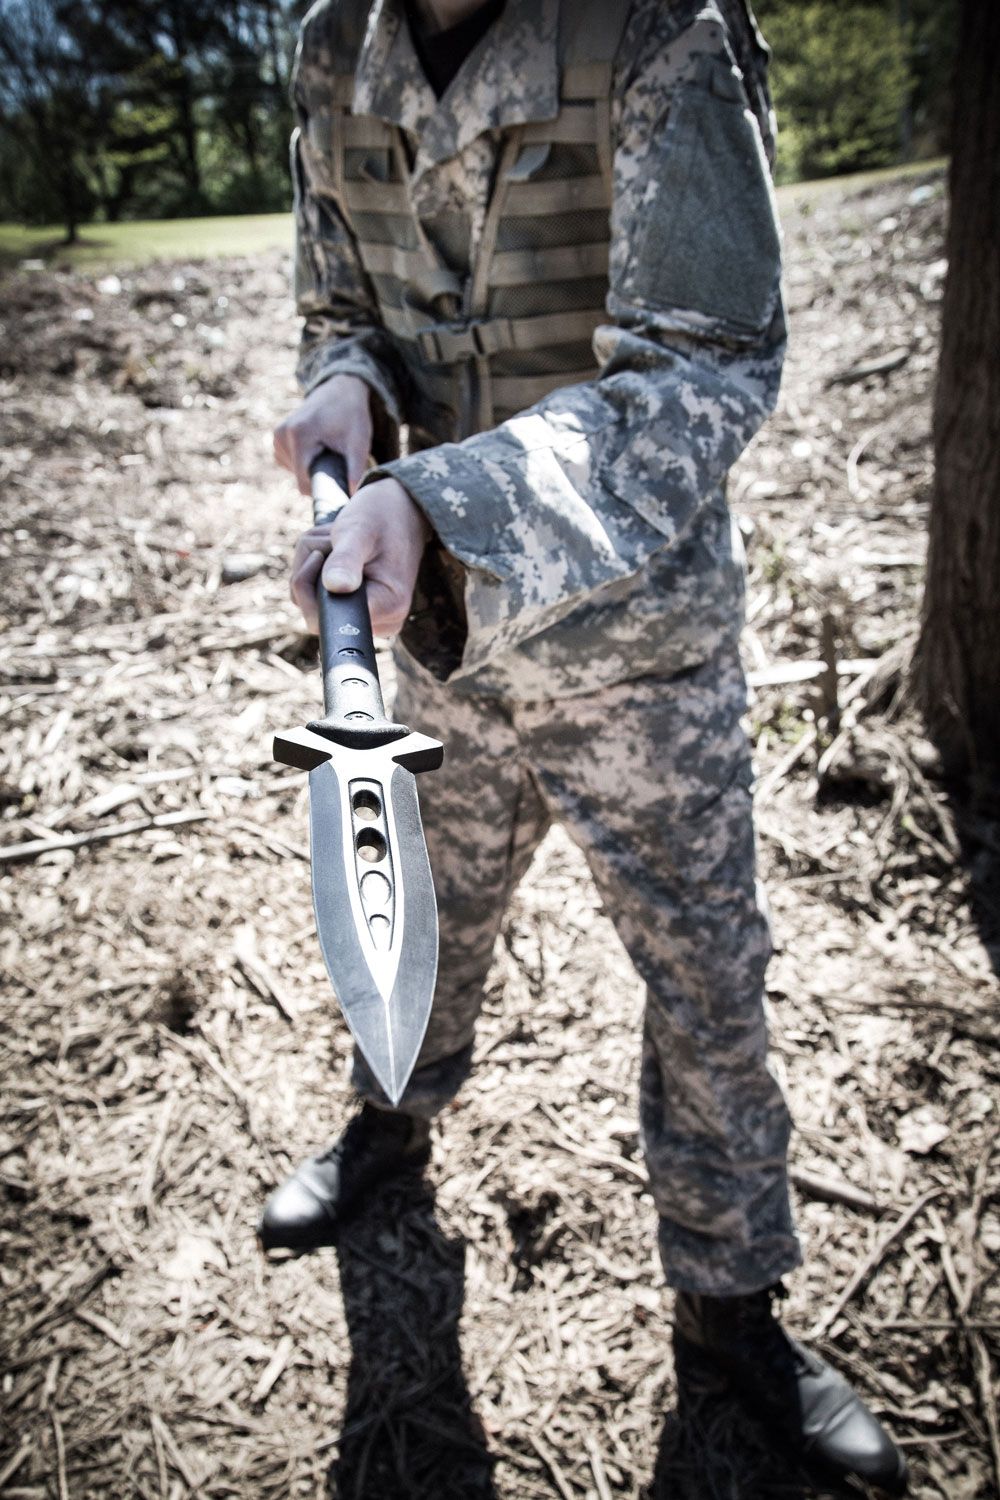  REAPR 11003 Survival Spear, Stainless Steel Hunting